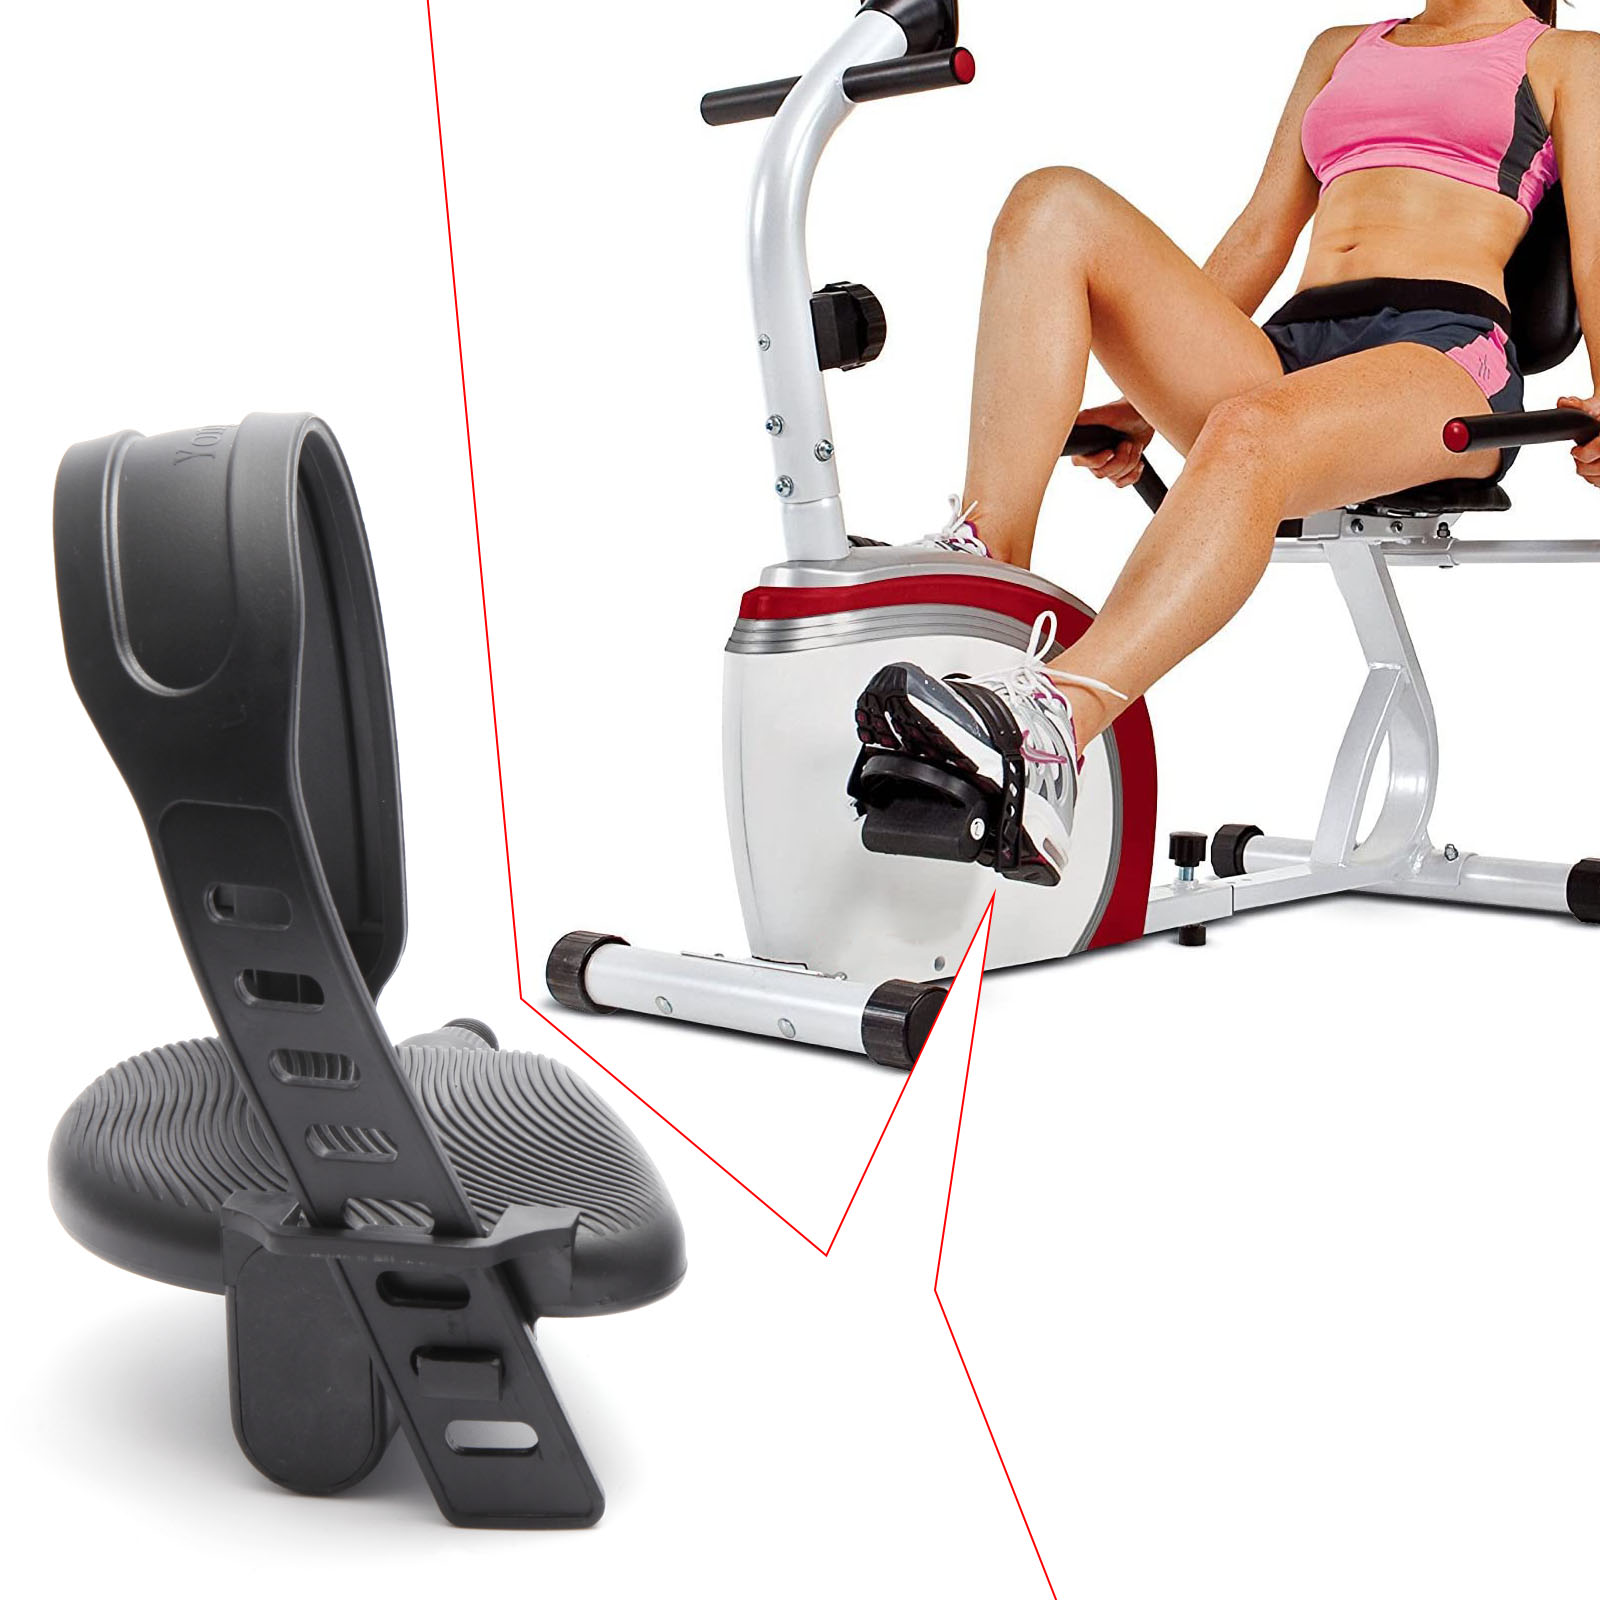 Exerciser Bike Pedals with Strap for Stationary Spin Bike Recumbent 1/2